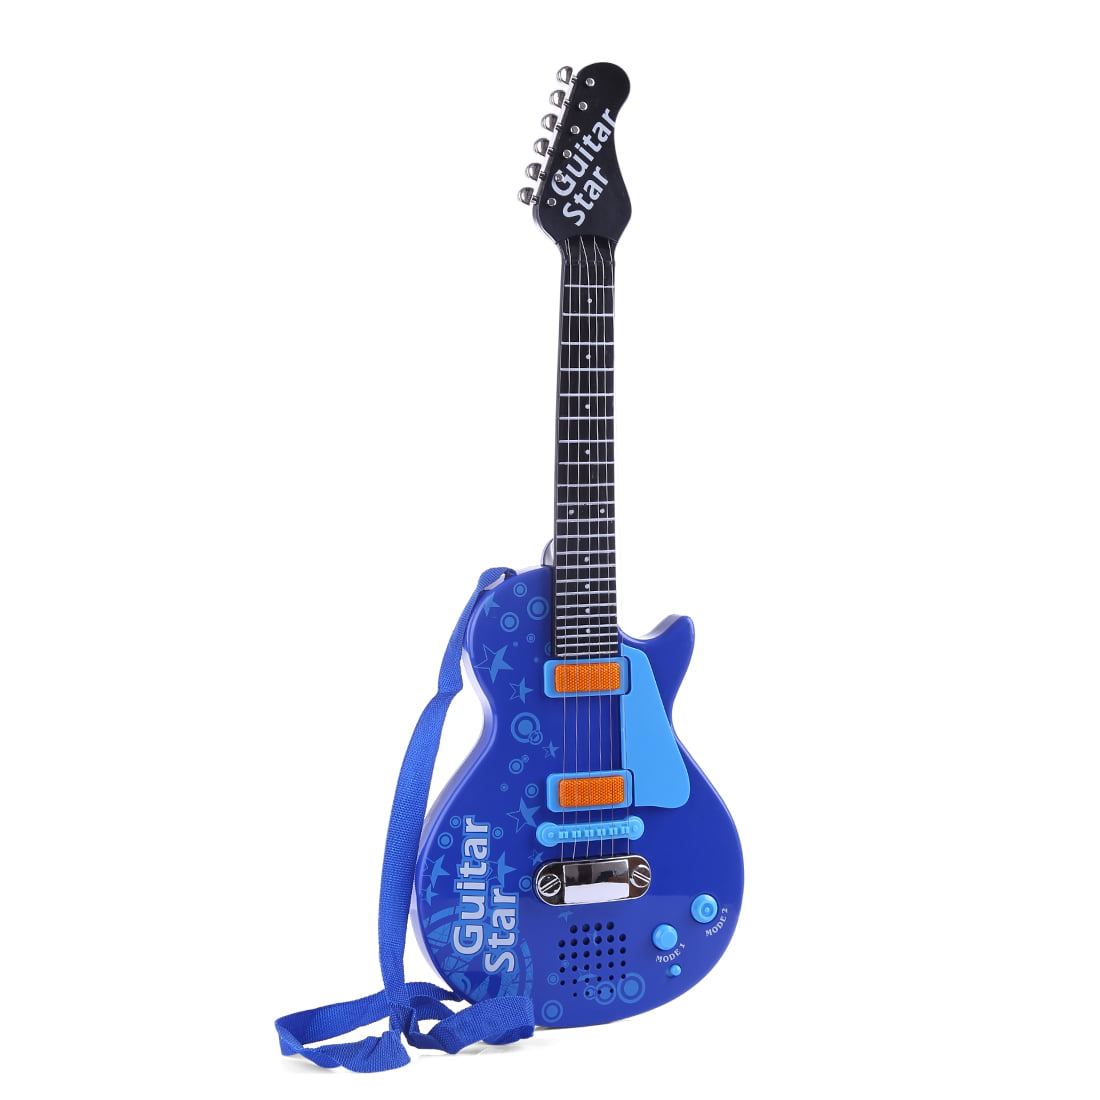 Blue Kids Electric Guitar Educational Musical Instrument Toy With Lights Music 